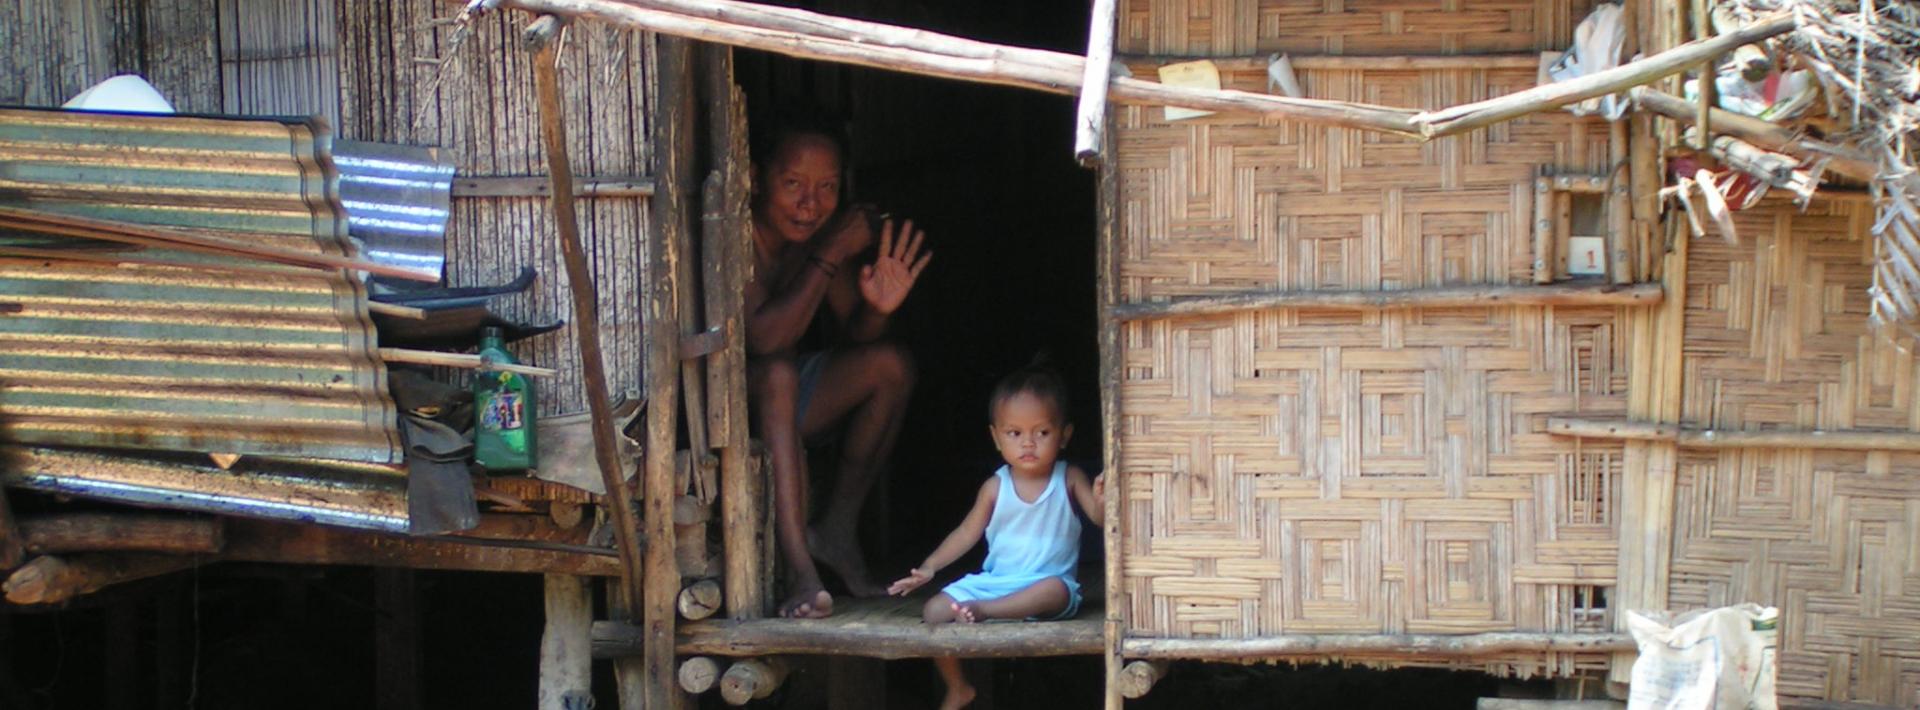 a woman and child inside a thatched hut